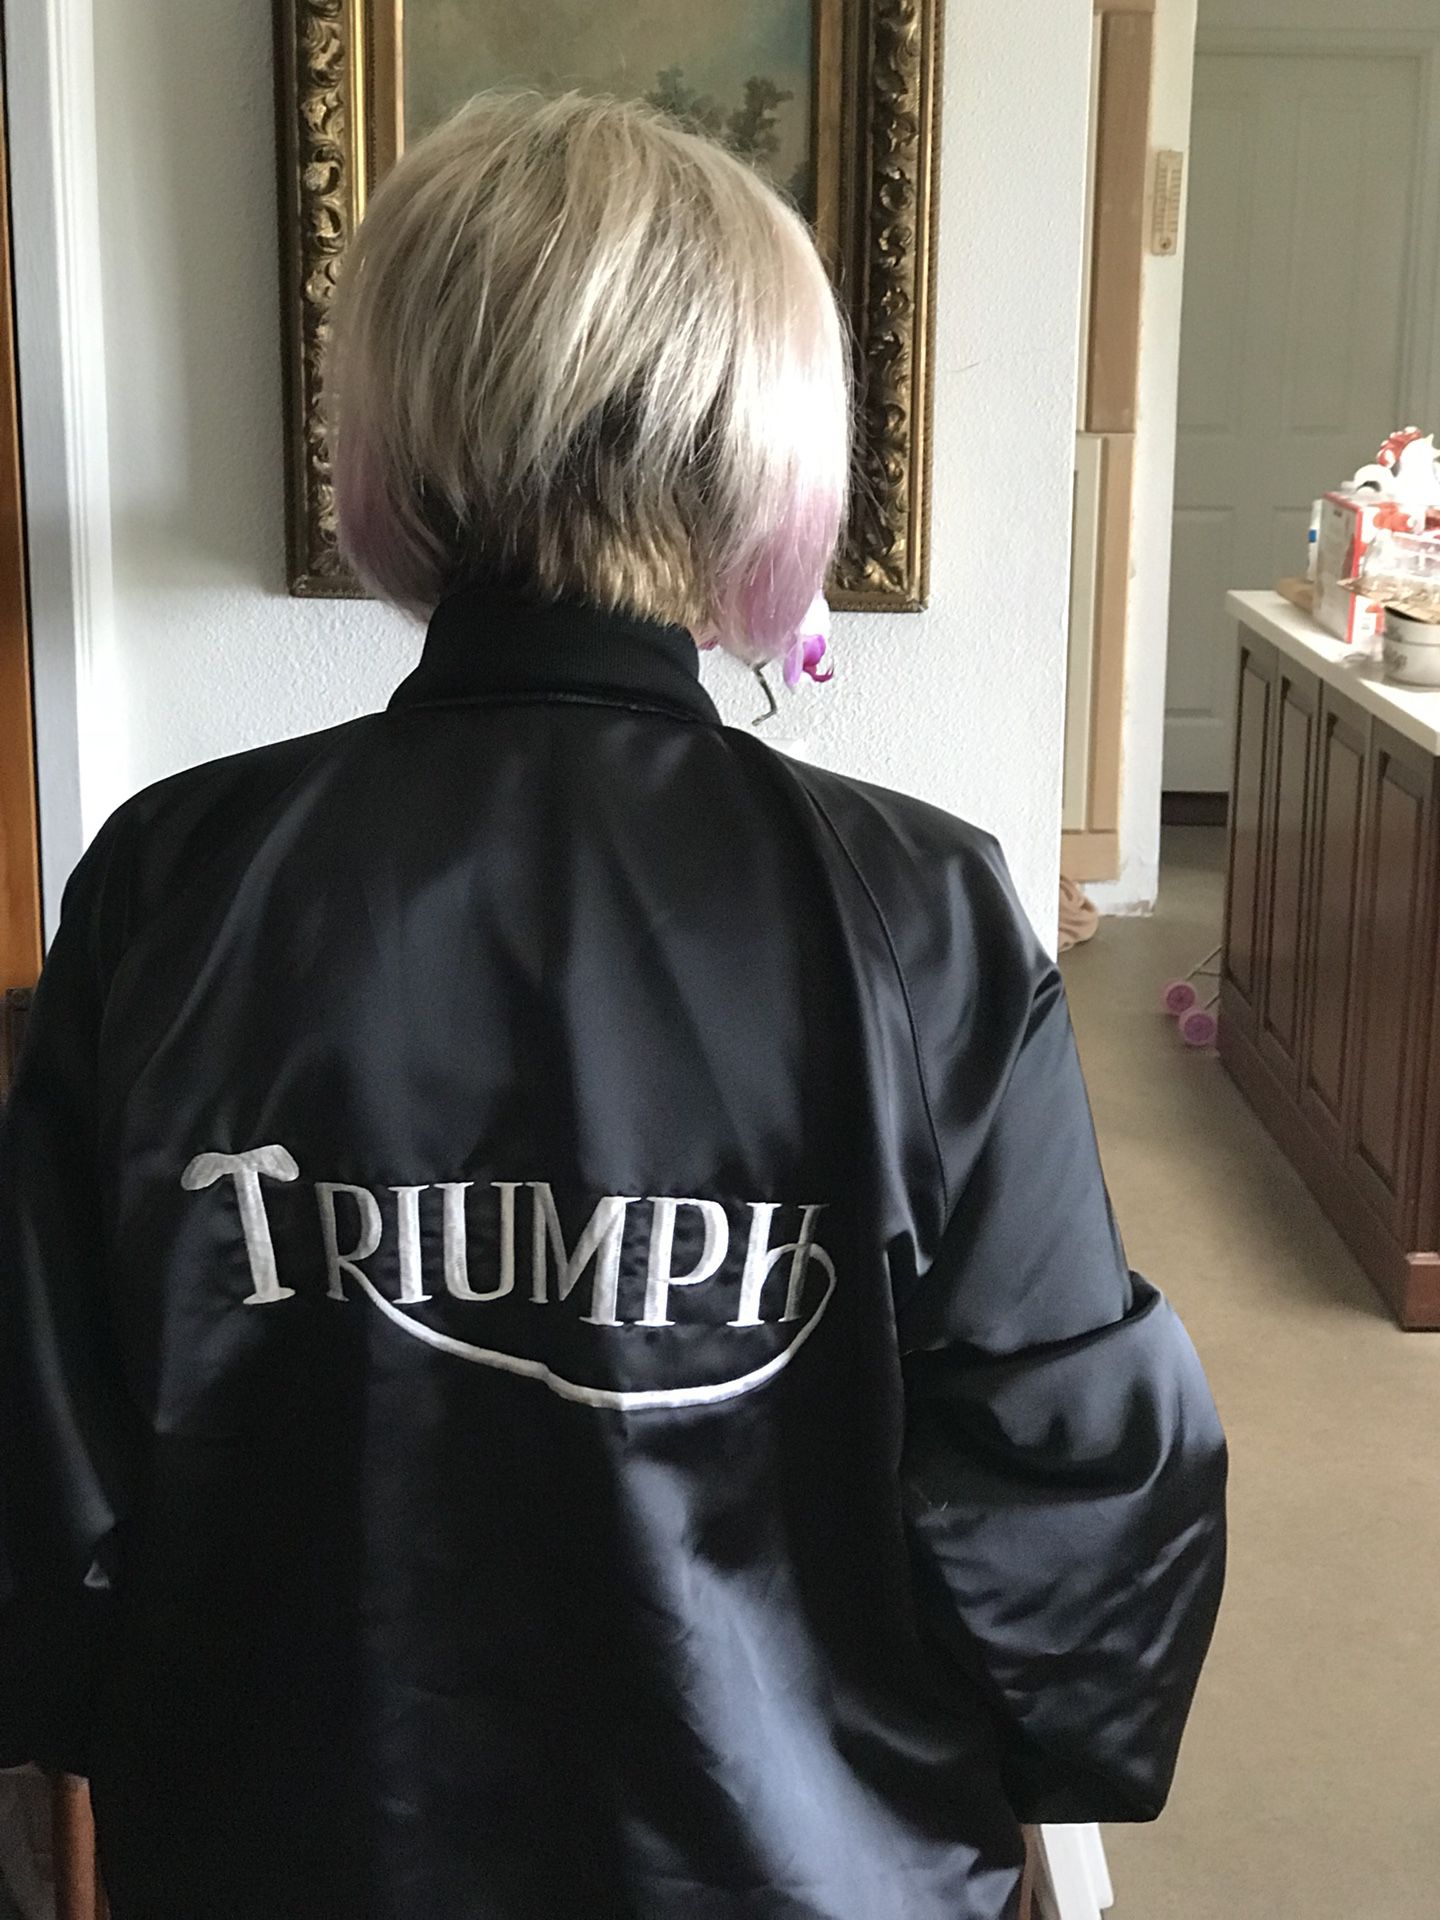 Xl Embroidered Silk Jacket with (Triumph) motorcycle on it